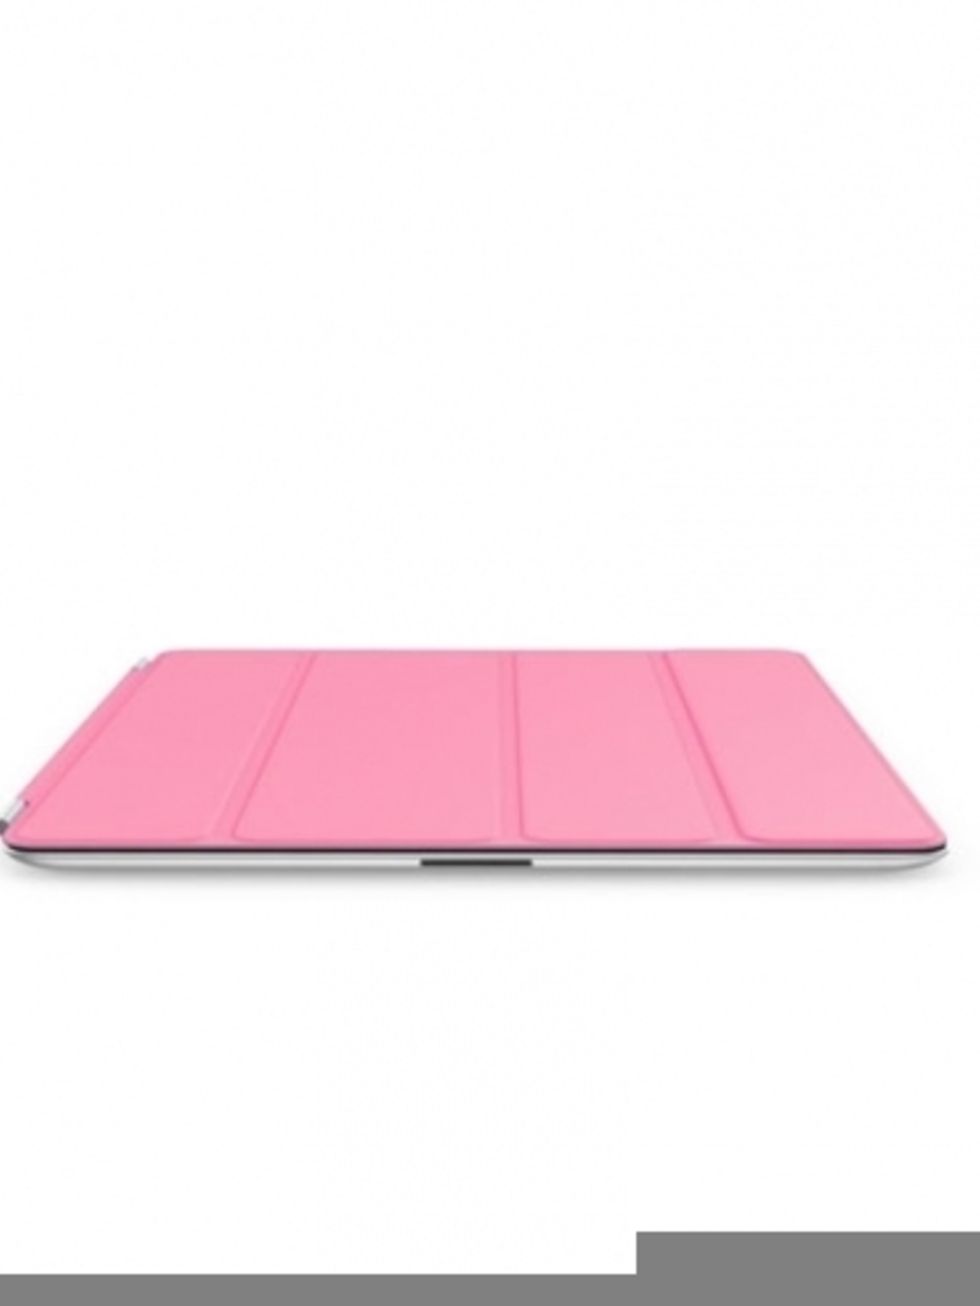 Electronic device, Magenta, Pink, Technology, Purple, Laptop accessory, Laptop part, Office equipment, Computer accessory, Computer hardware, 